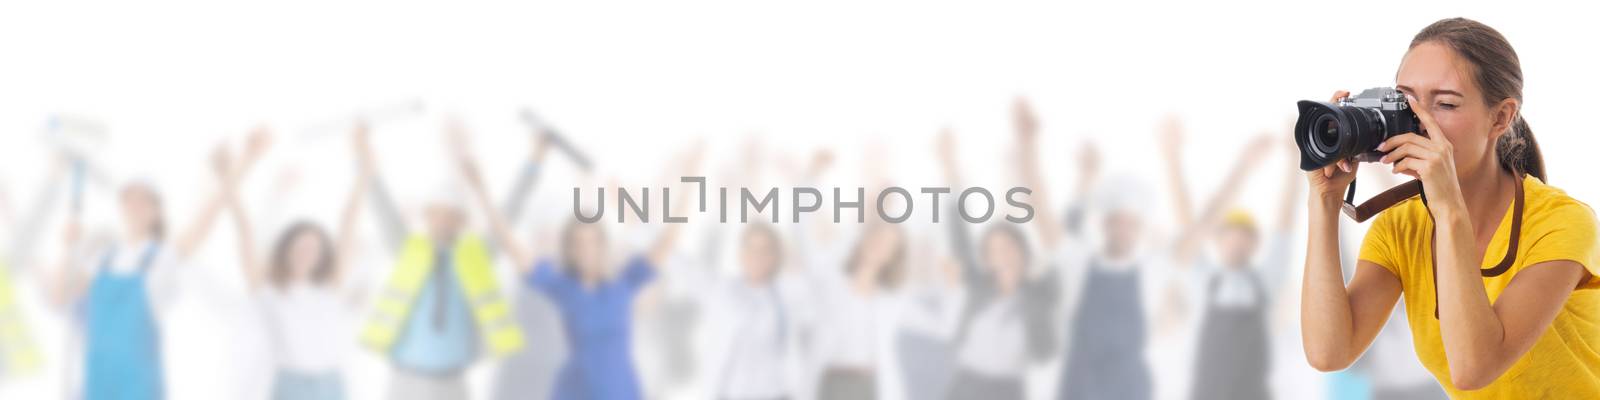 Young photographer girl with camera over many customers people isolated white background